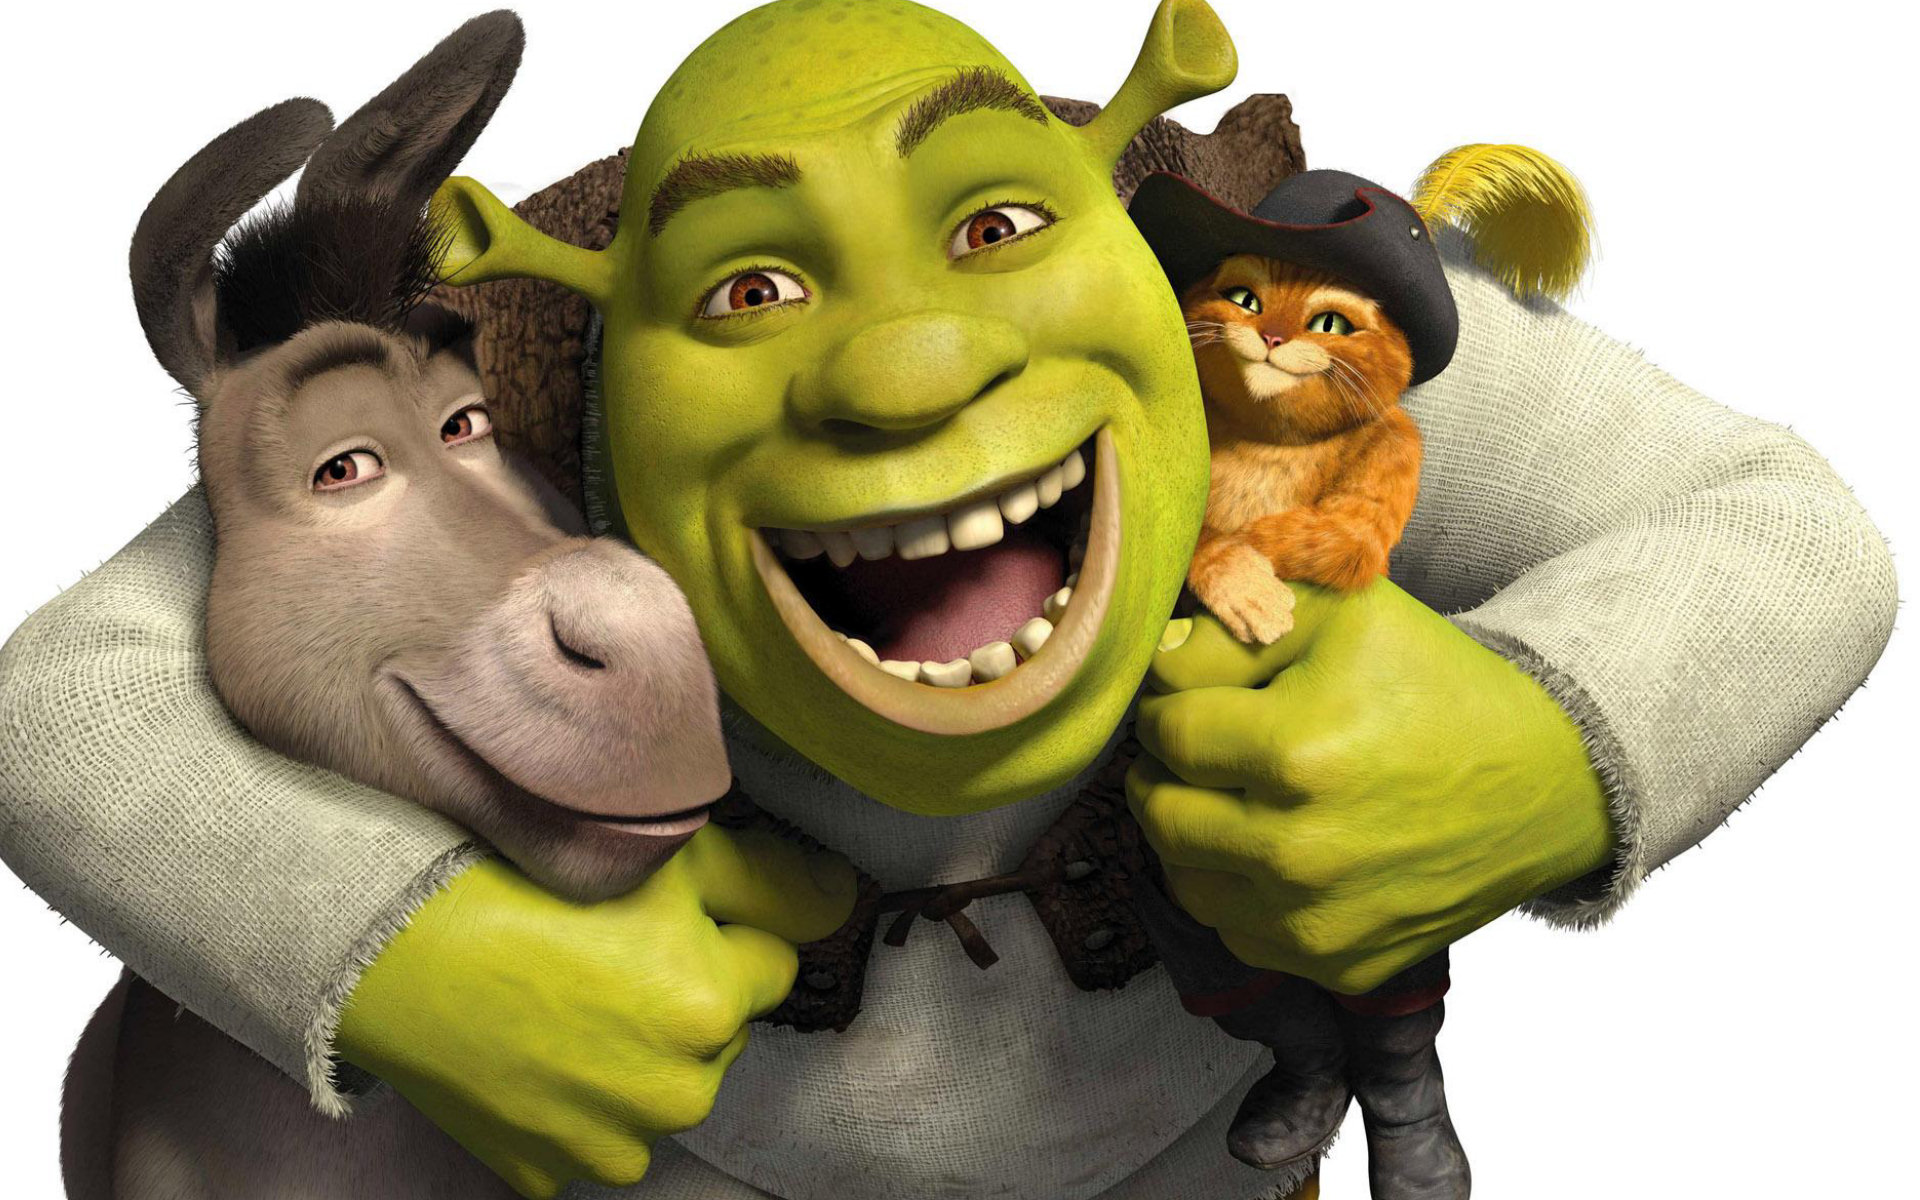 Shrek character hd papers and backgrounds